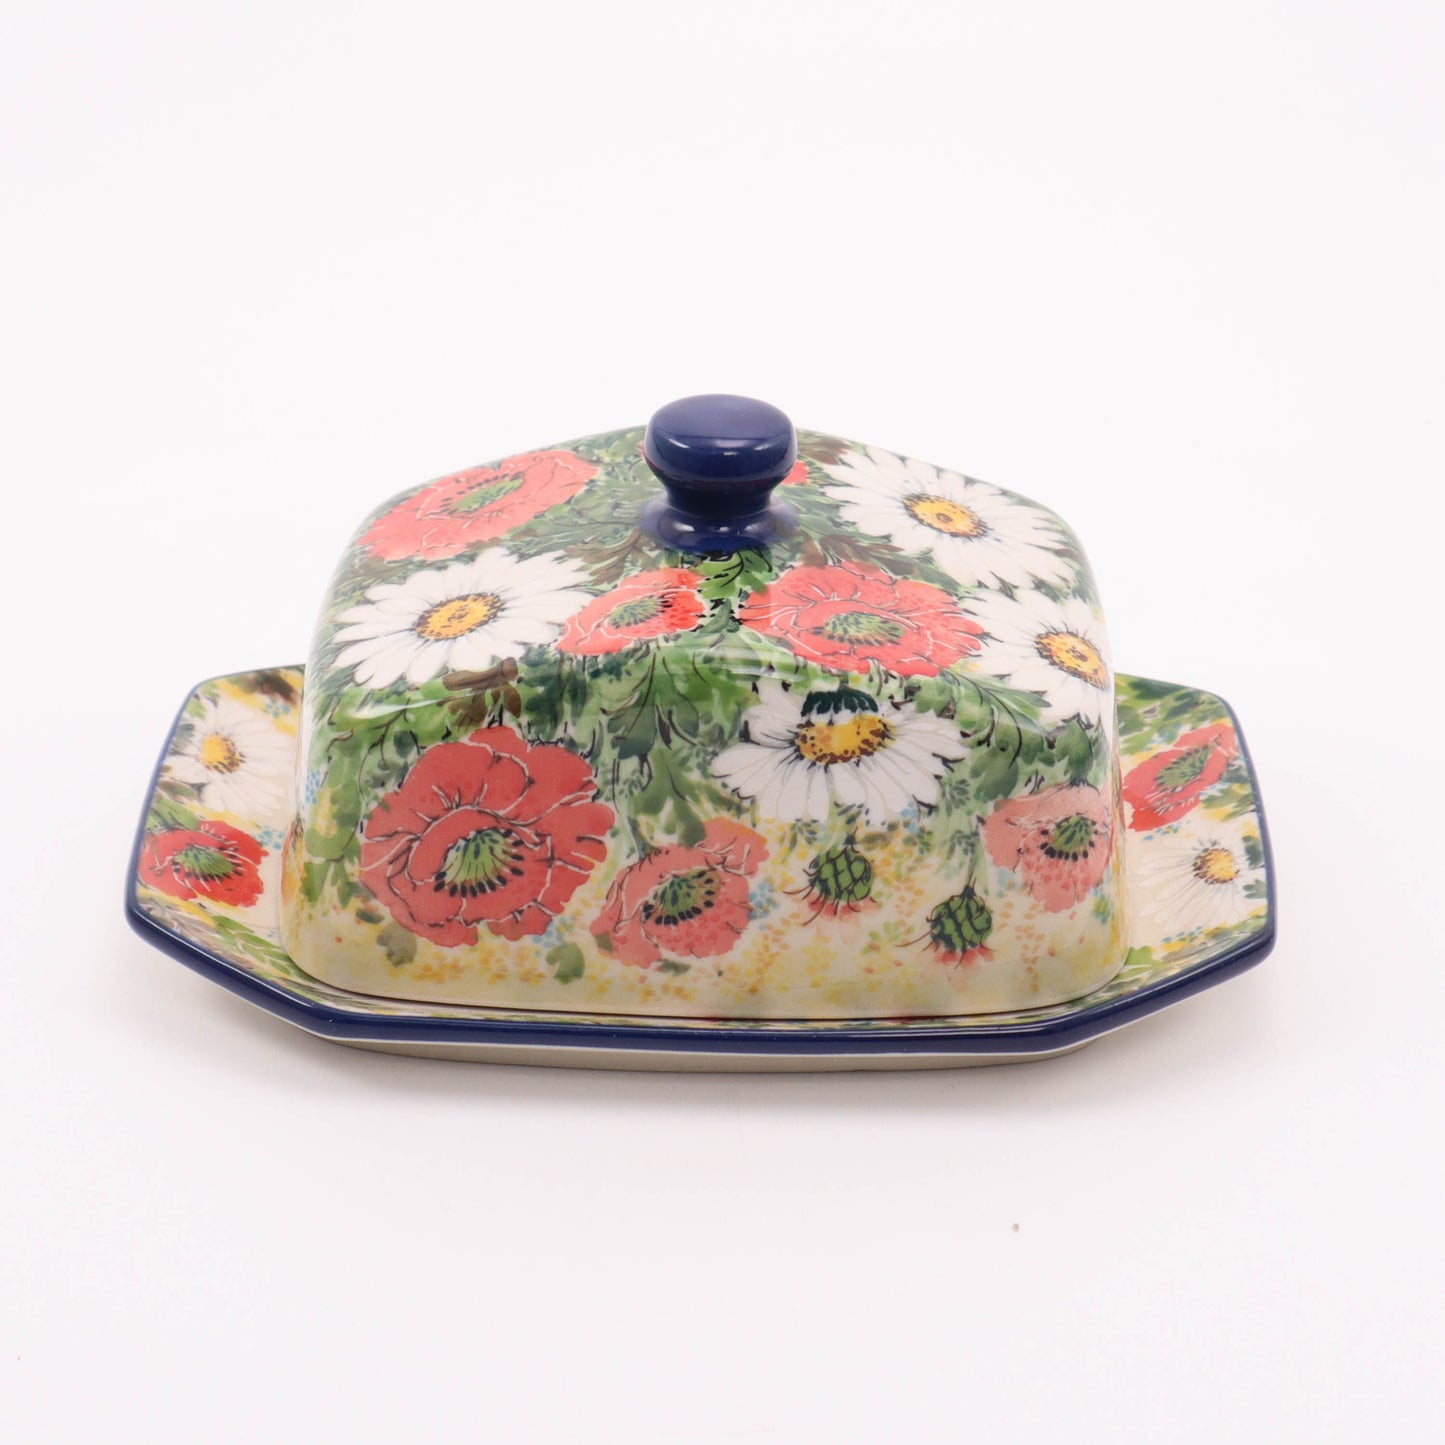 7"x5"x3" Butter Dish. Pattern: LE